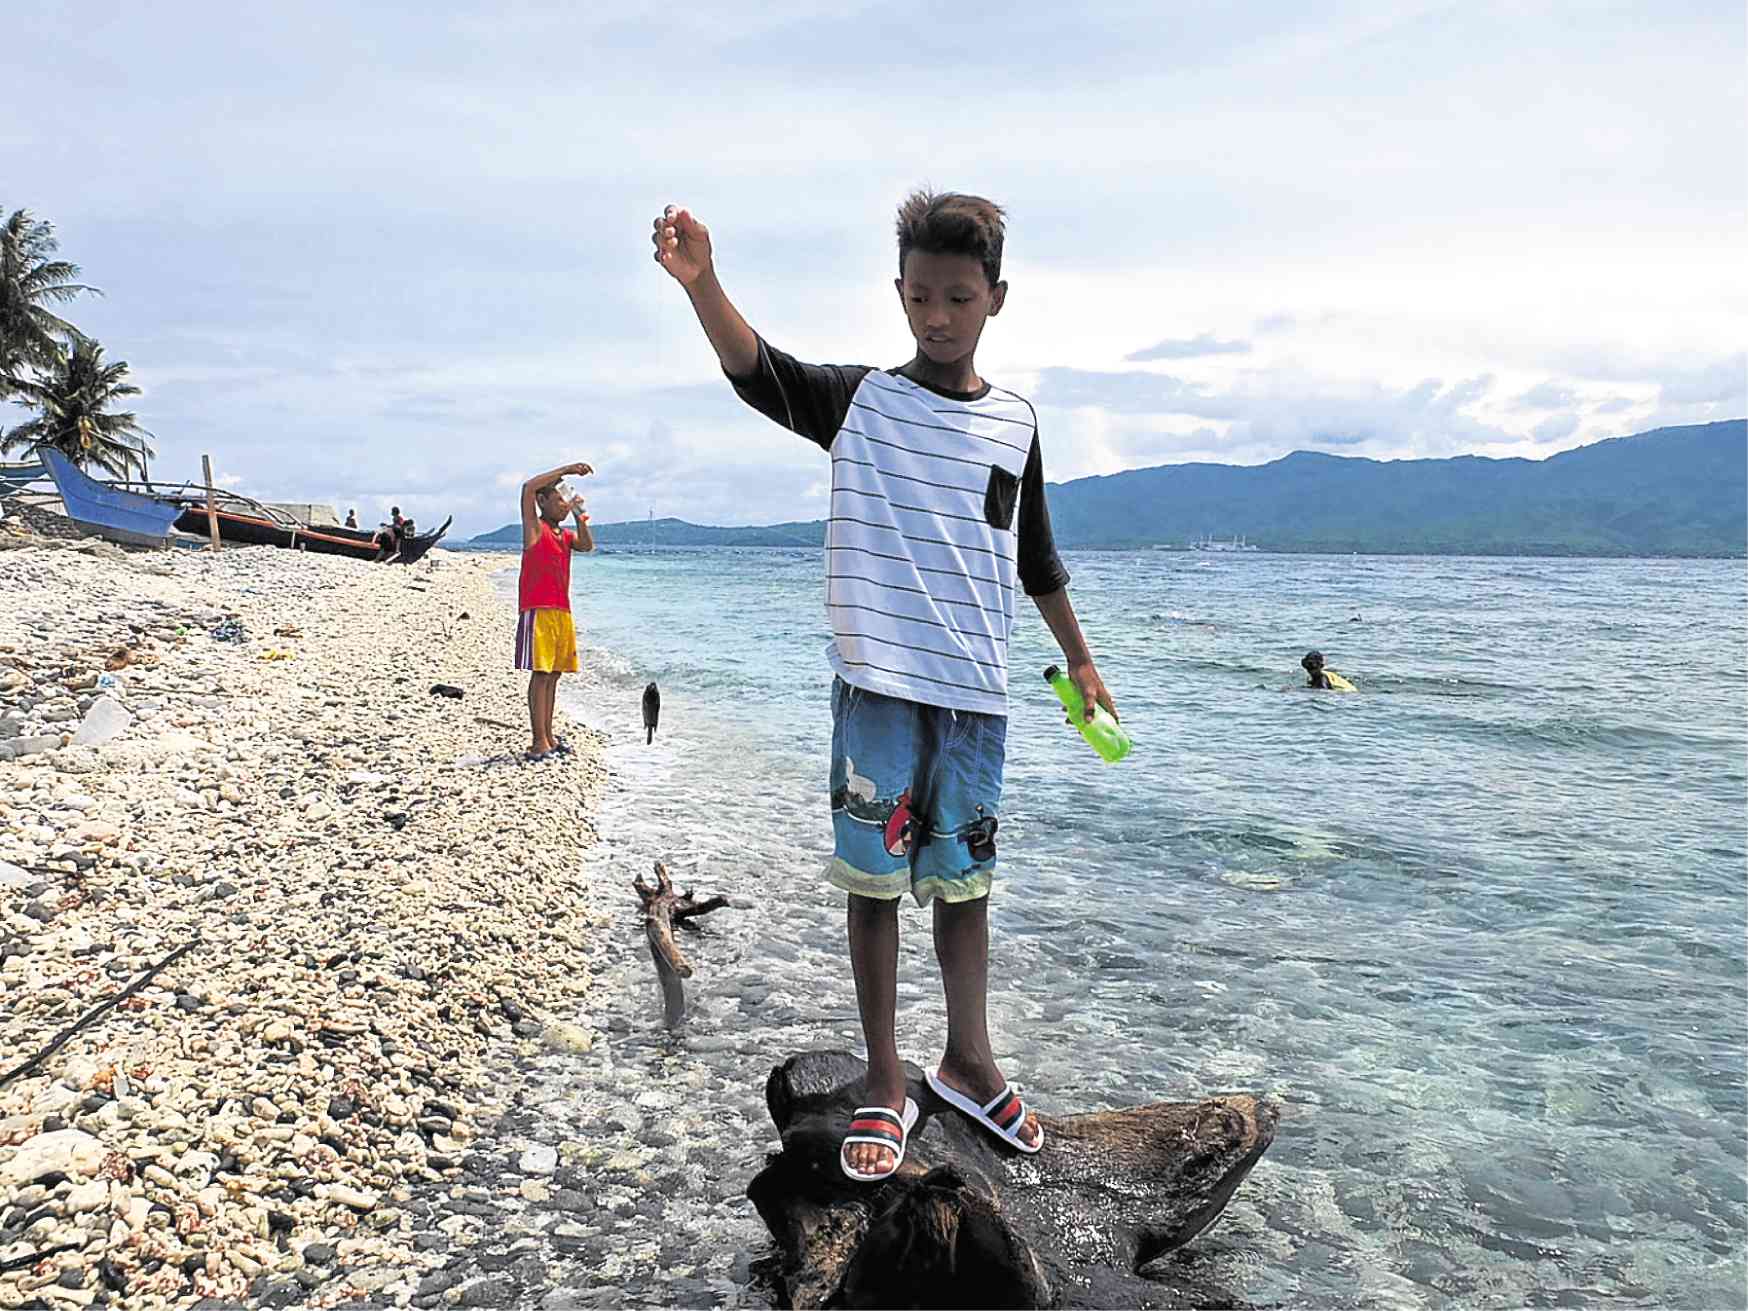 Scientists: Protect Verde Island before it meets same fate as Boracay